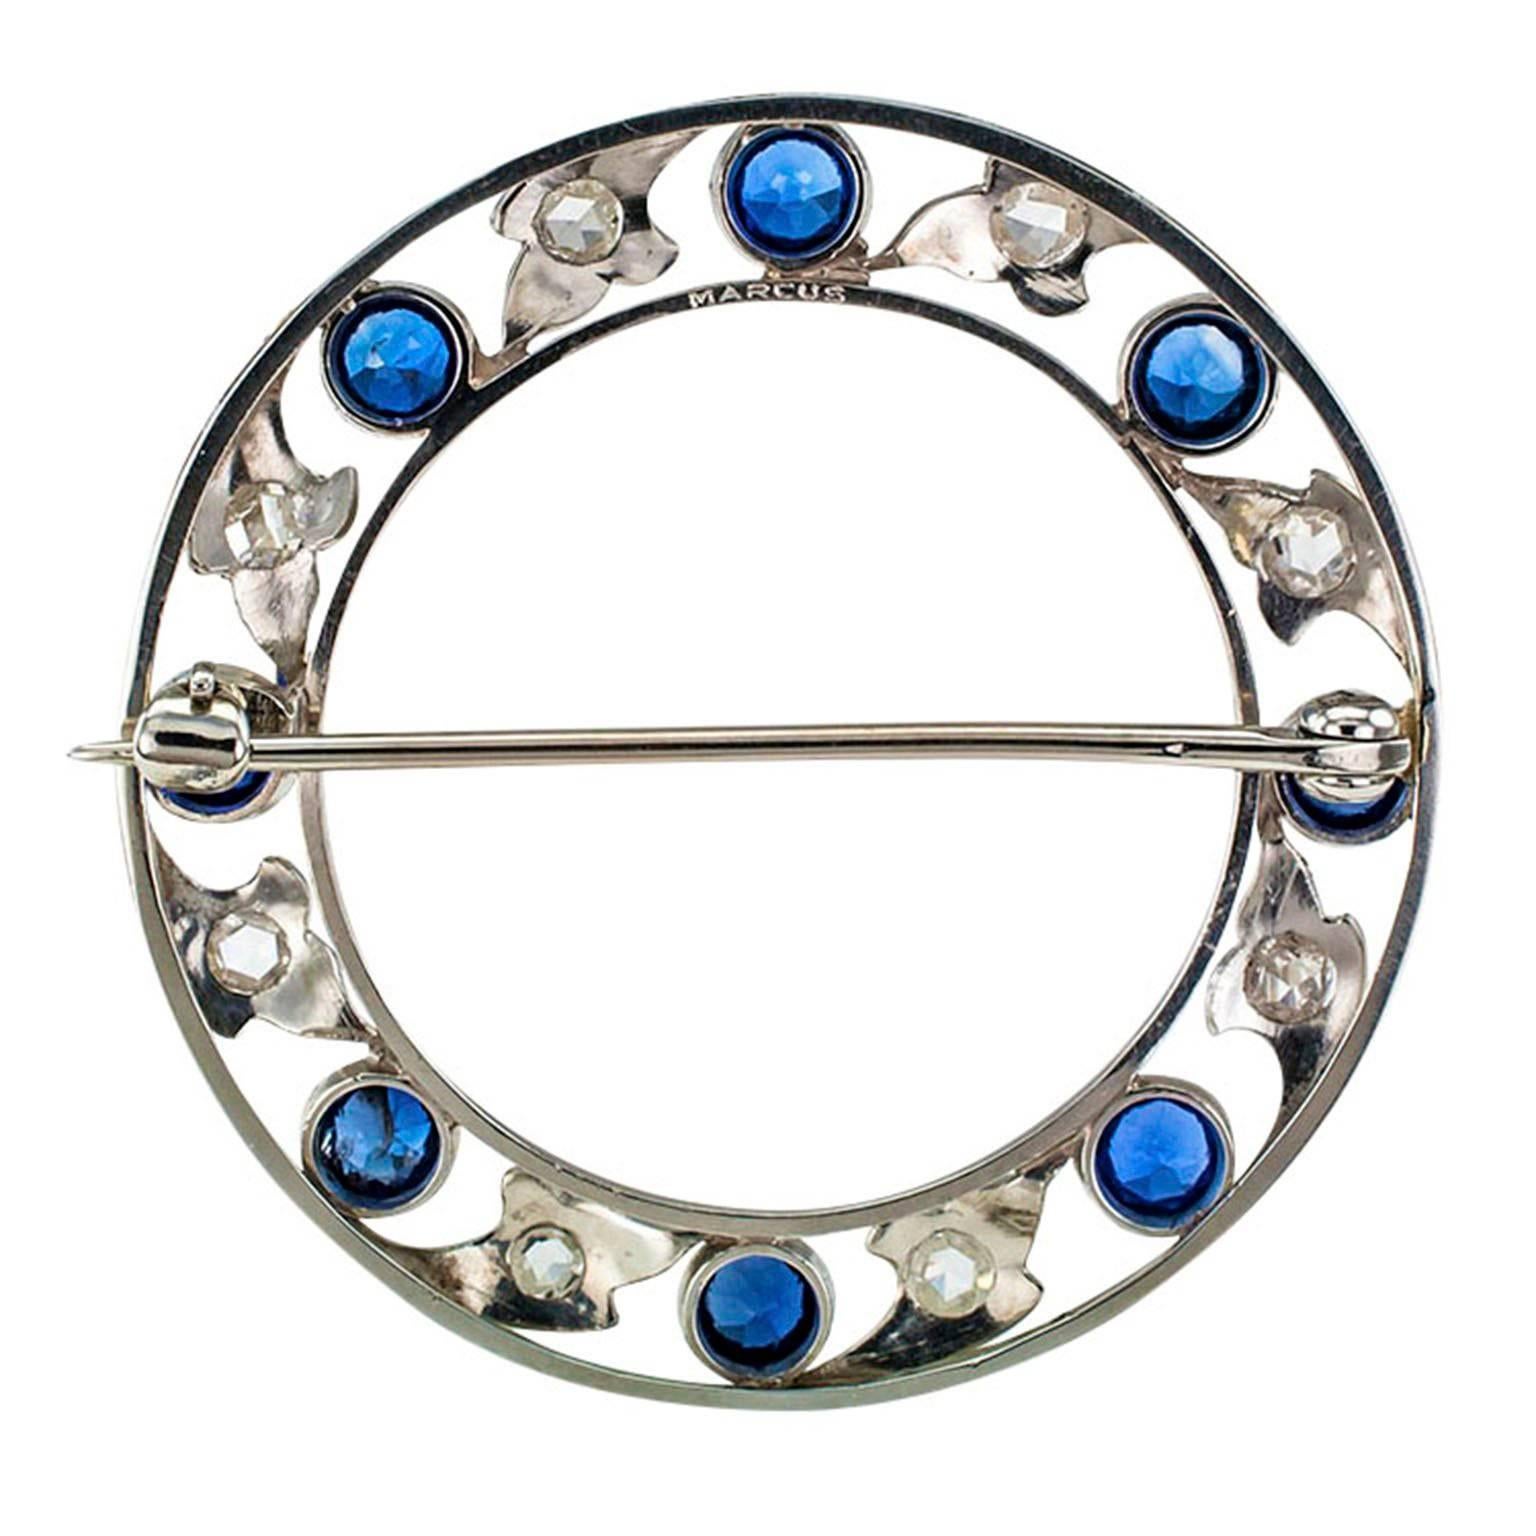 Marcus & Co. Edwardian Blue Sapphire and Rose-Cut Diamond Circle Brooch.

A ribbon of  blue sapphires and rose-cut diamonds mounted in platinum by Marcus & Co circa 1910.  The design evokes a delicate and airy construction shaped into a circular